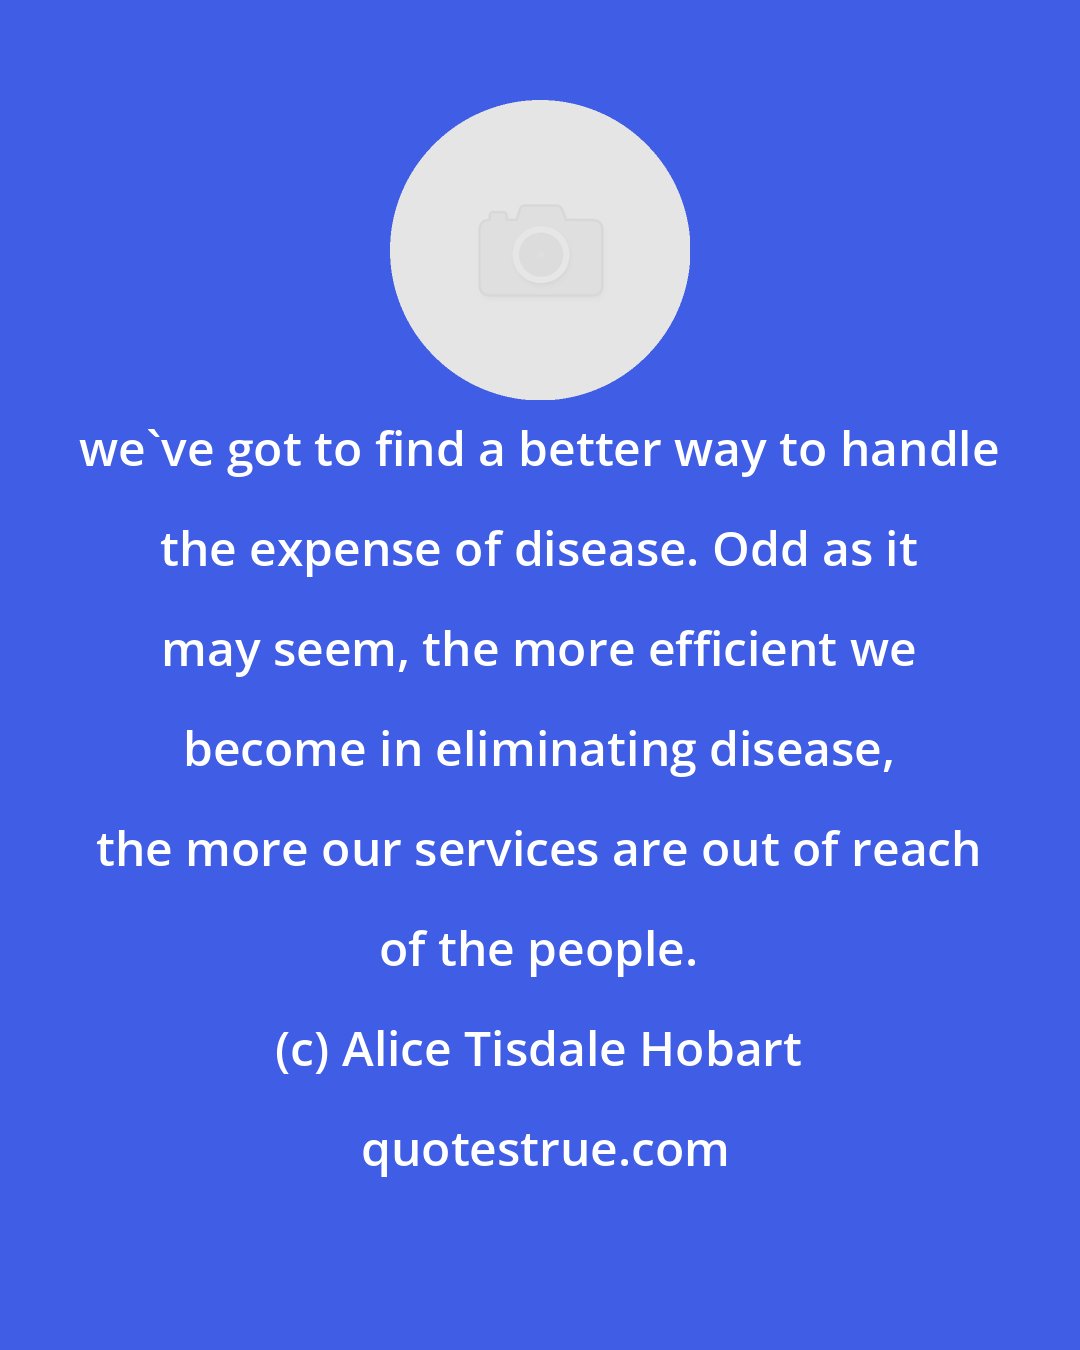 Alice Tisdale Hobart: we've got to find a better way to handle the expense of disease. Odd as it may seem, the more efficient we become in eliminating disease, the more our services are out of reach of the people.